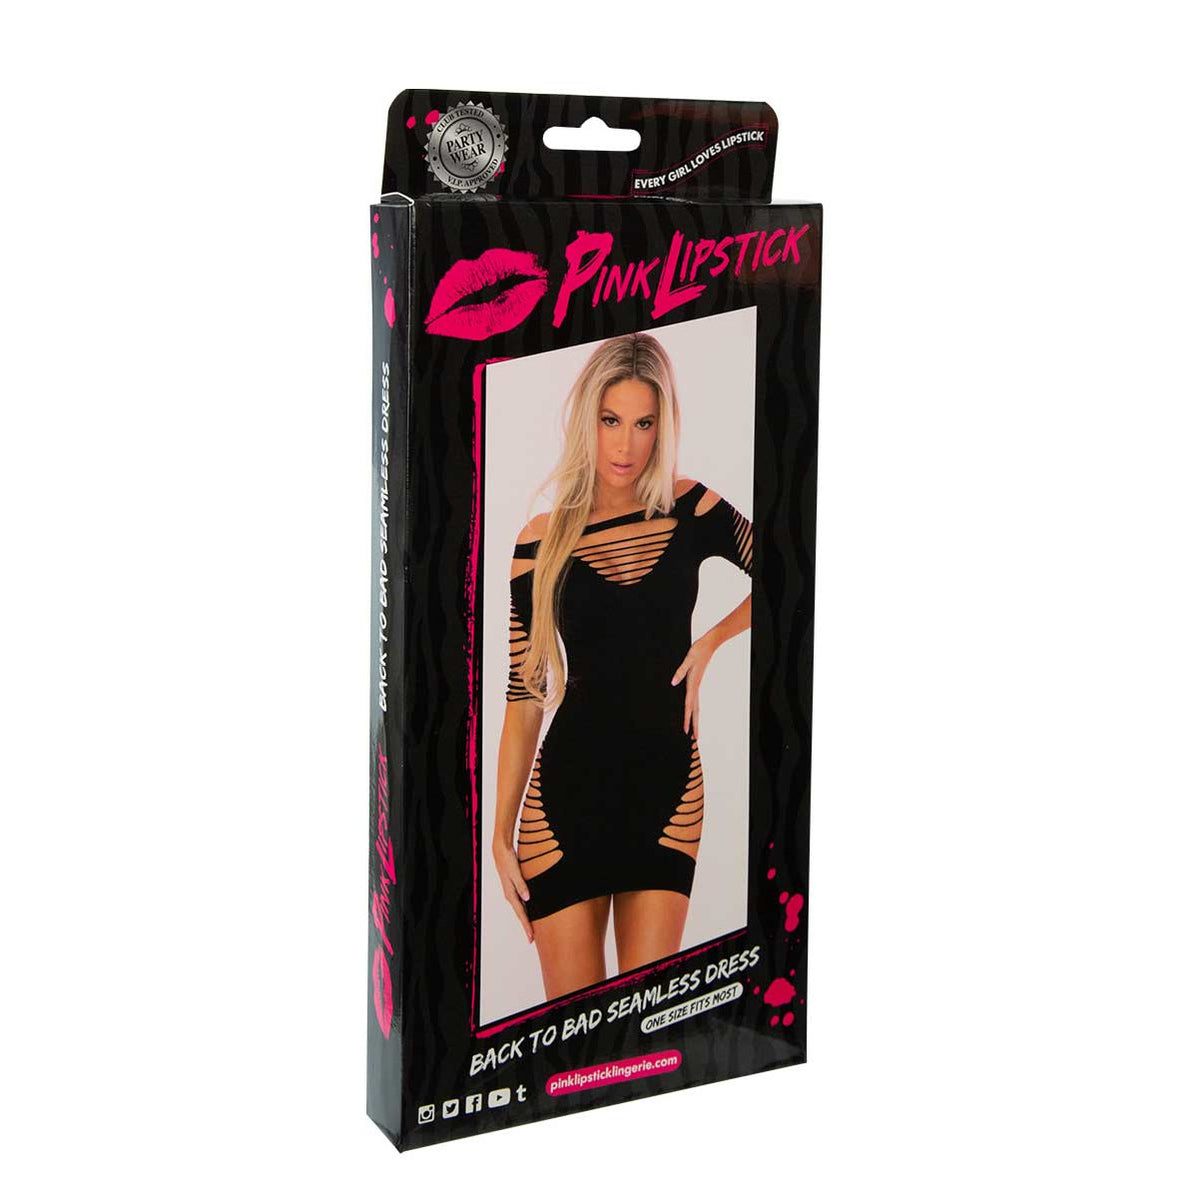 Pink Lipstick - Back to Bad Seamless Mini Dress - Black/ Red - One Size Fits Most